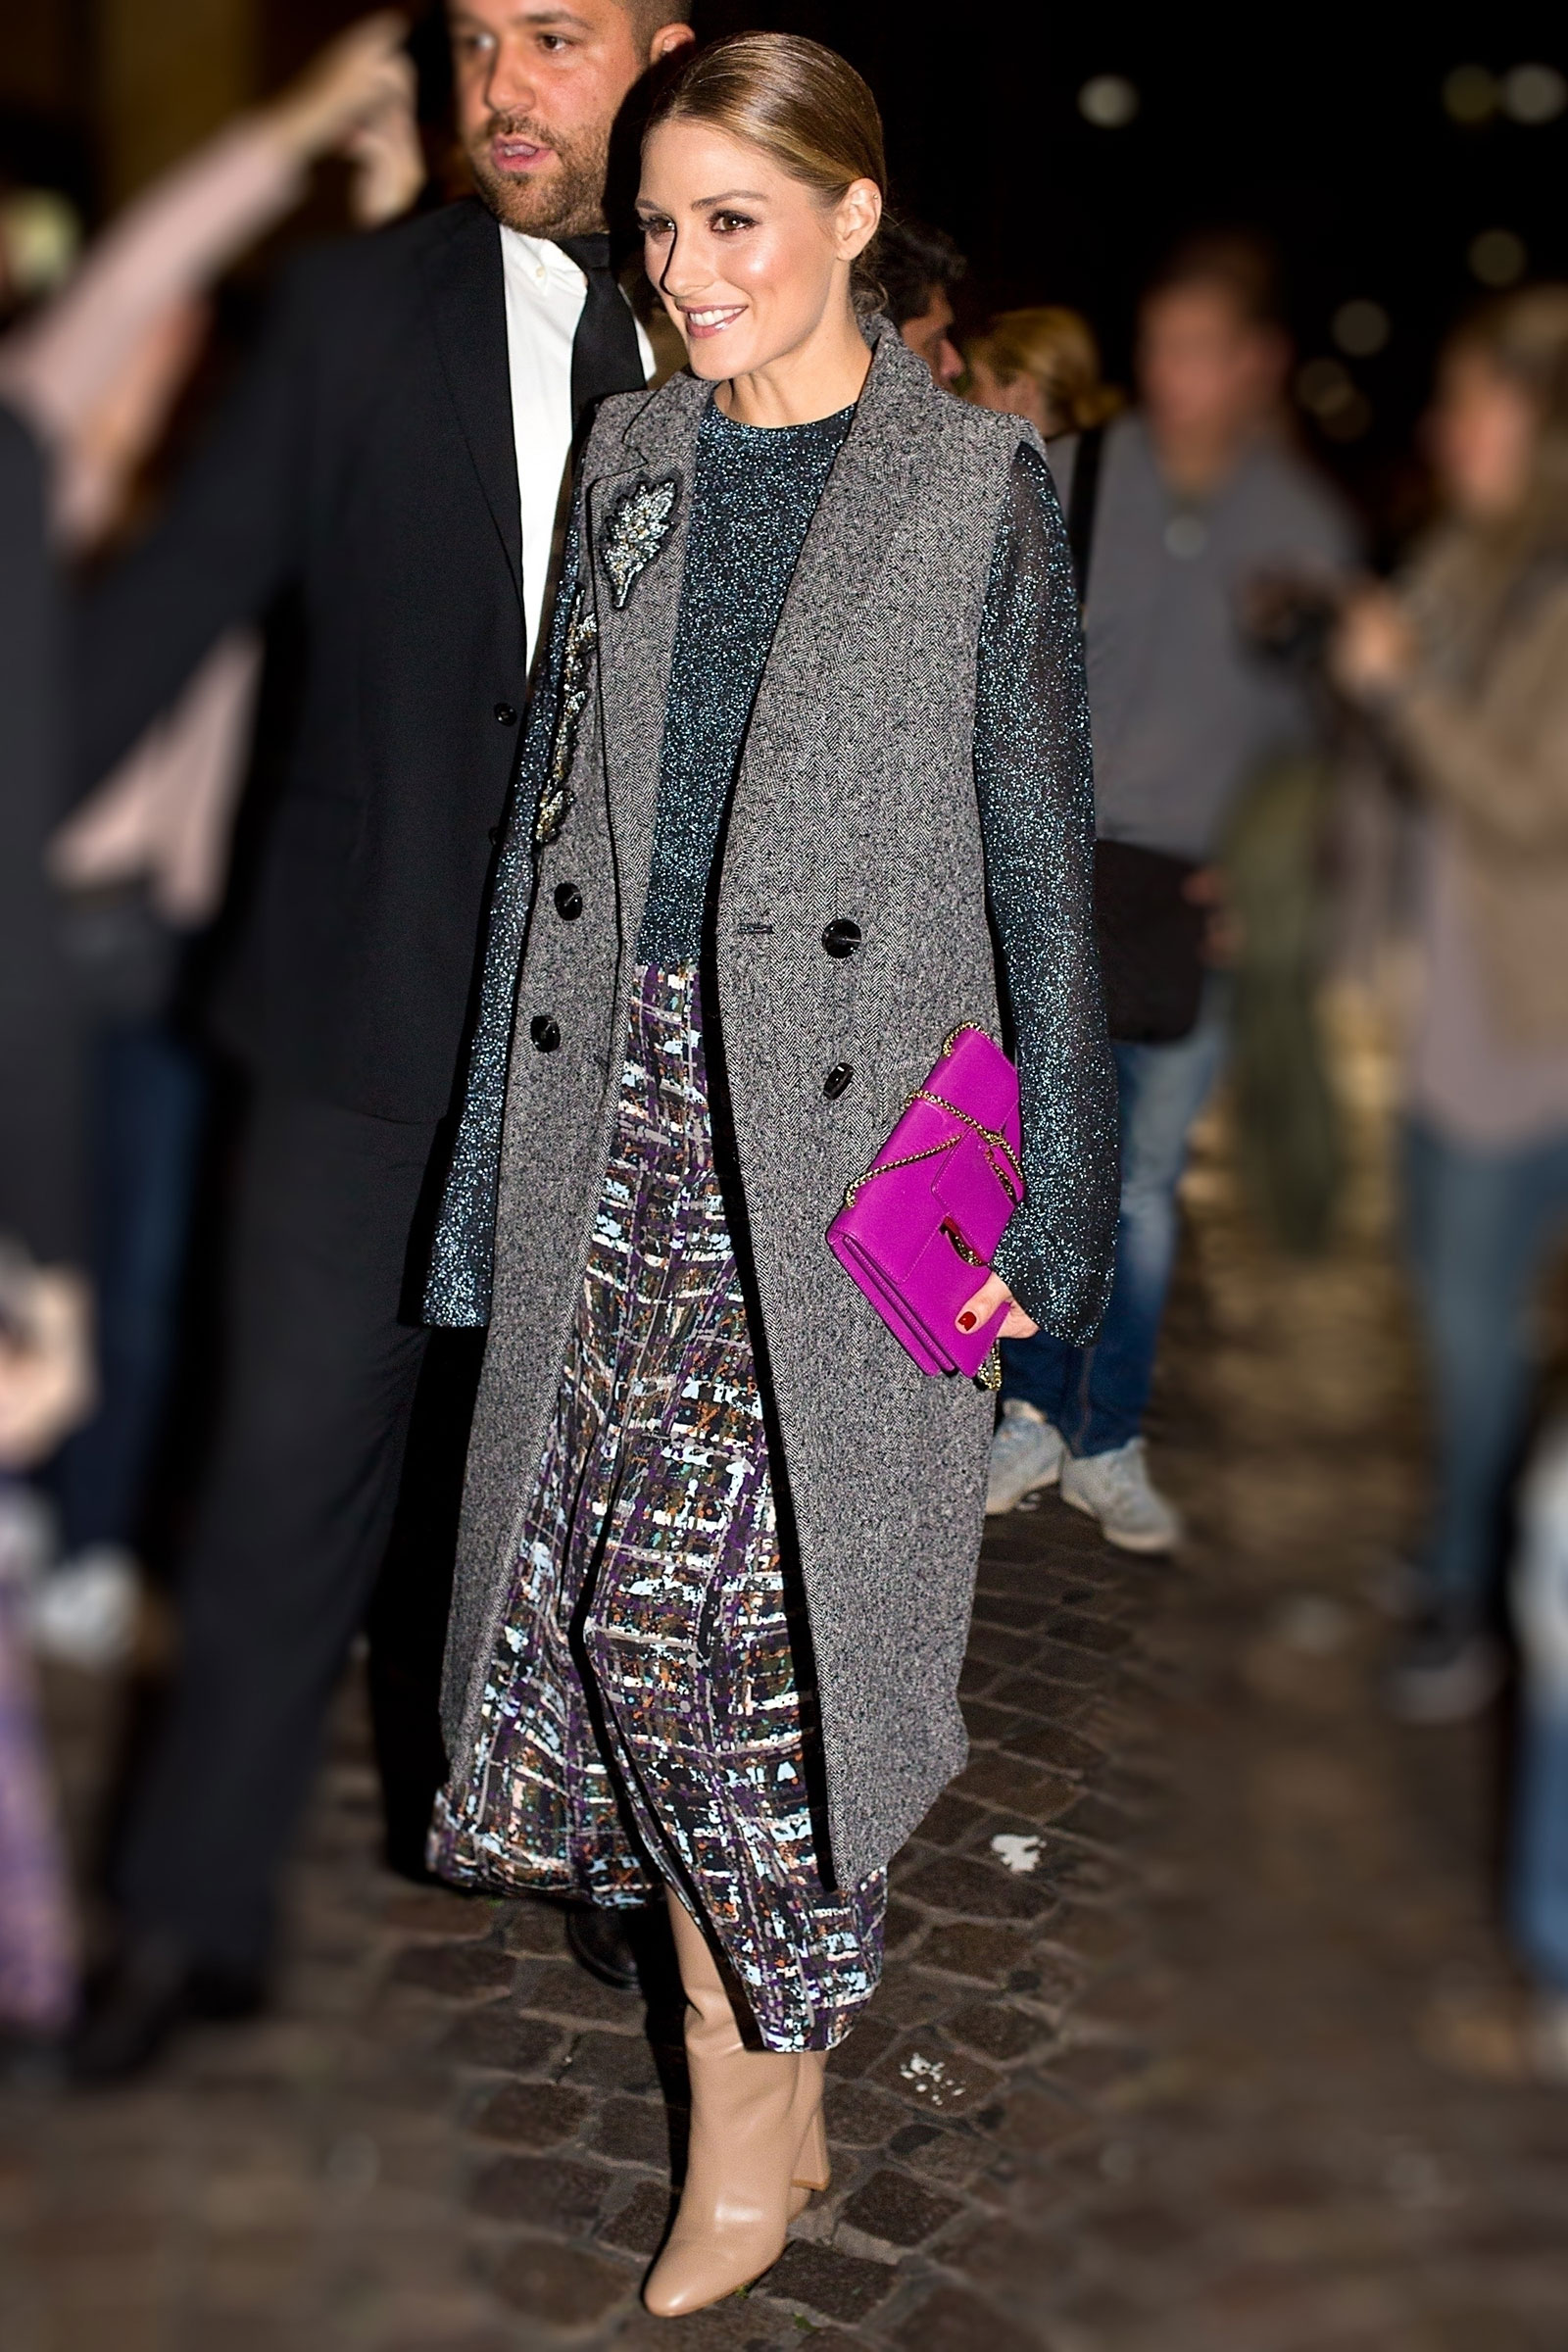 Olivia Palermo wears a sleeveless coat and beige boots at the Ferragamo show in Milan.